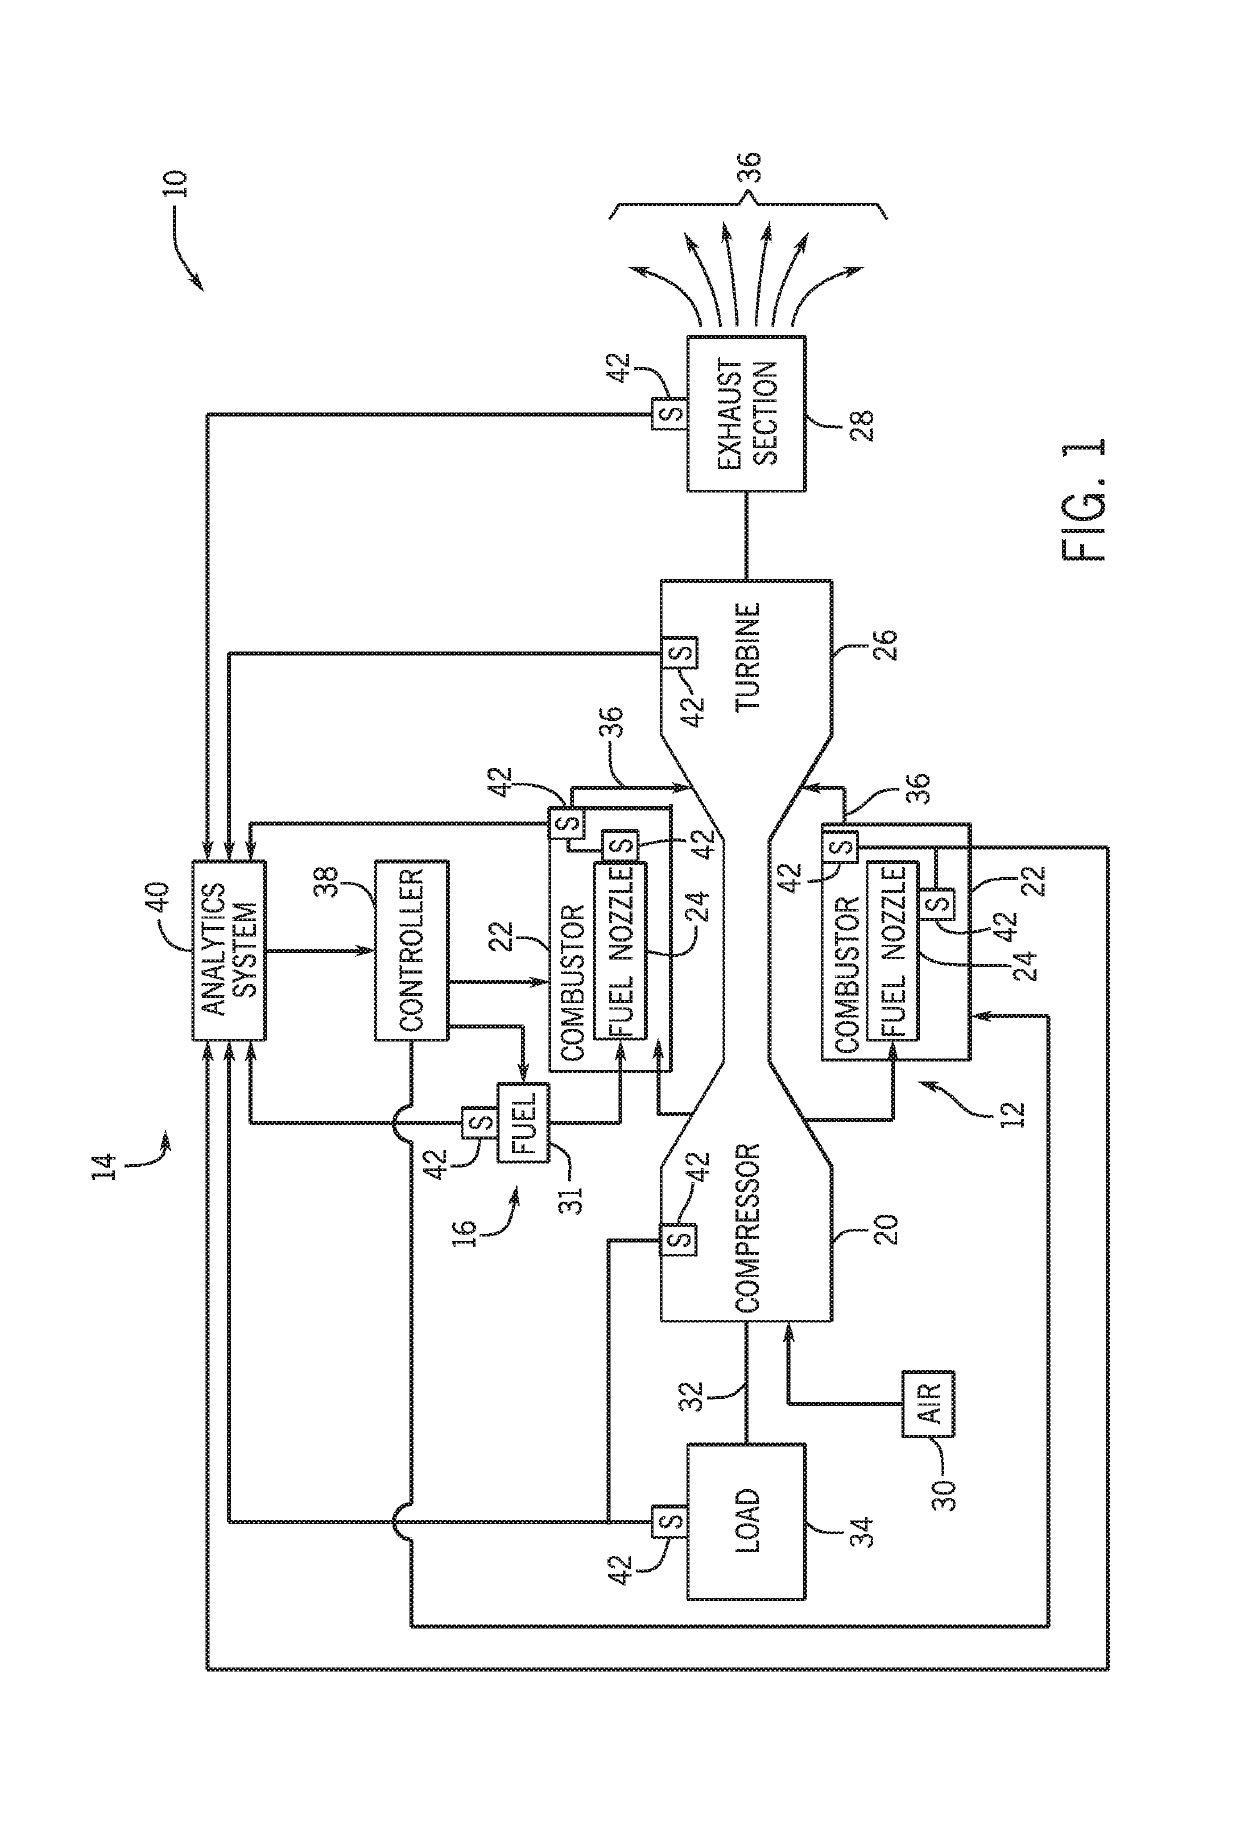 Systems and methods for determining operational impact on turbine component creep life